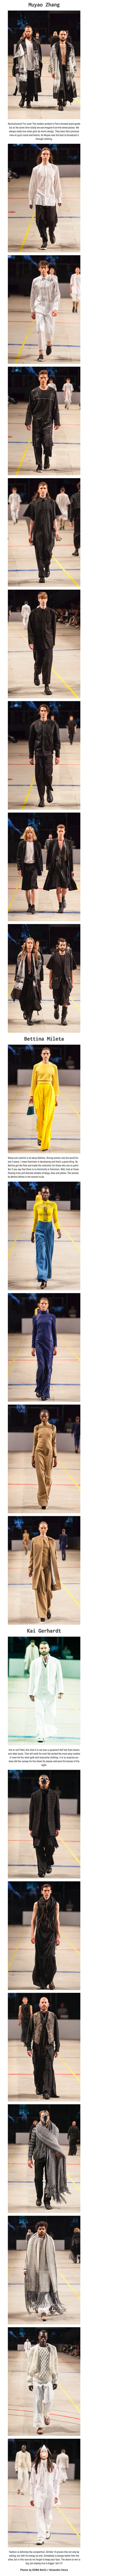 Berlin Fashion Week! SCHAU 15. Hot or Not? As we always say, fashion is all about the future. No surprise that sometimes it's much more fascinating to keep up